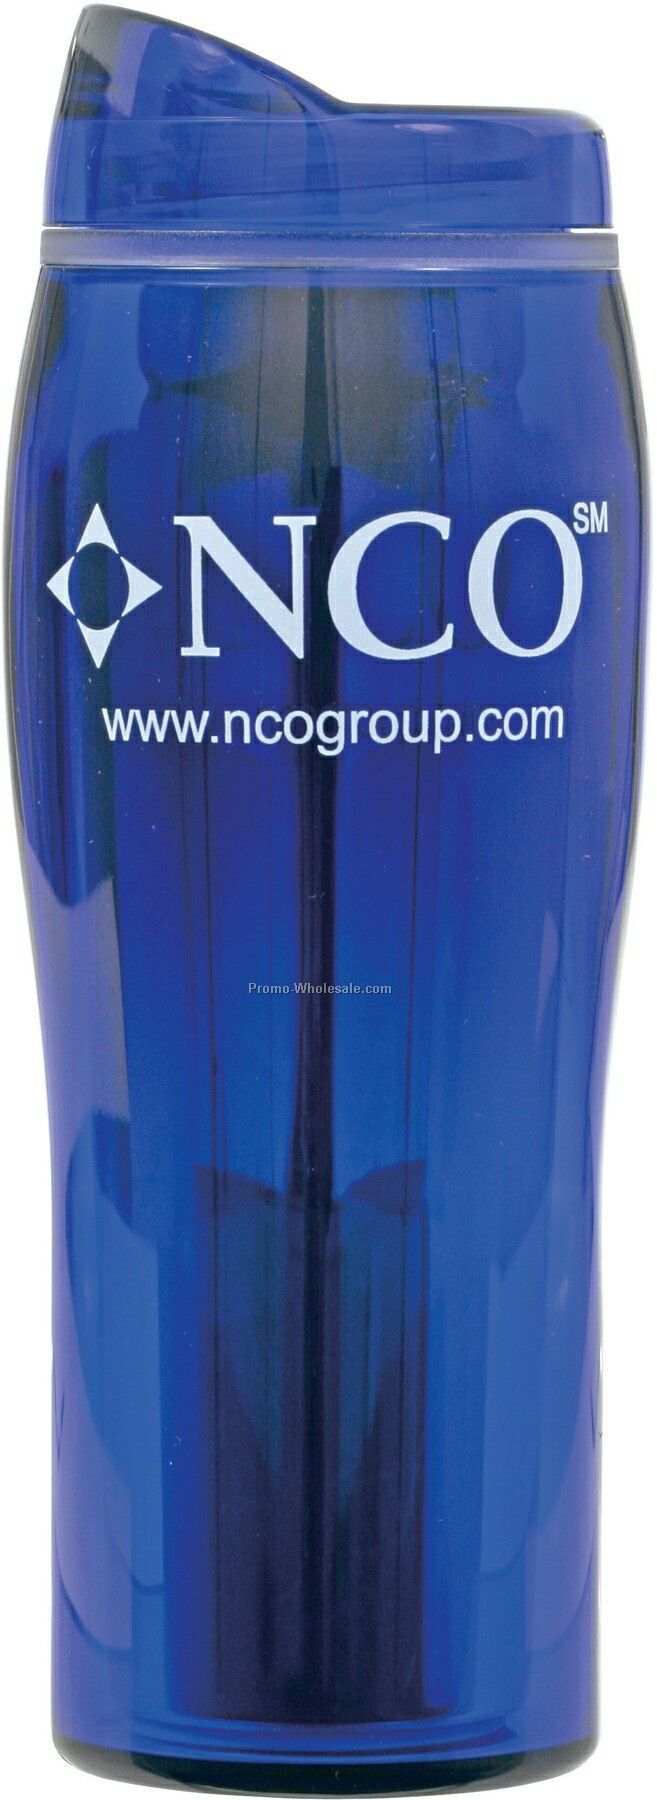 16 Oz. Acrylic Travel Tumbler With Plated Liner